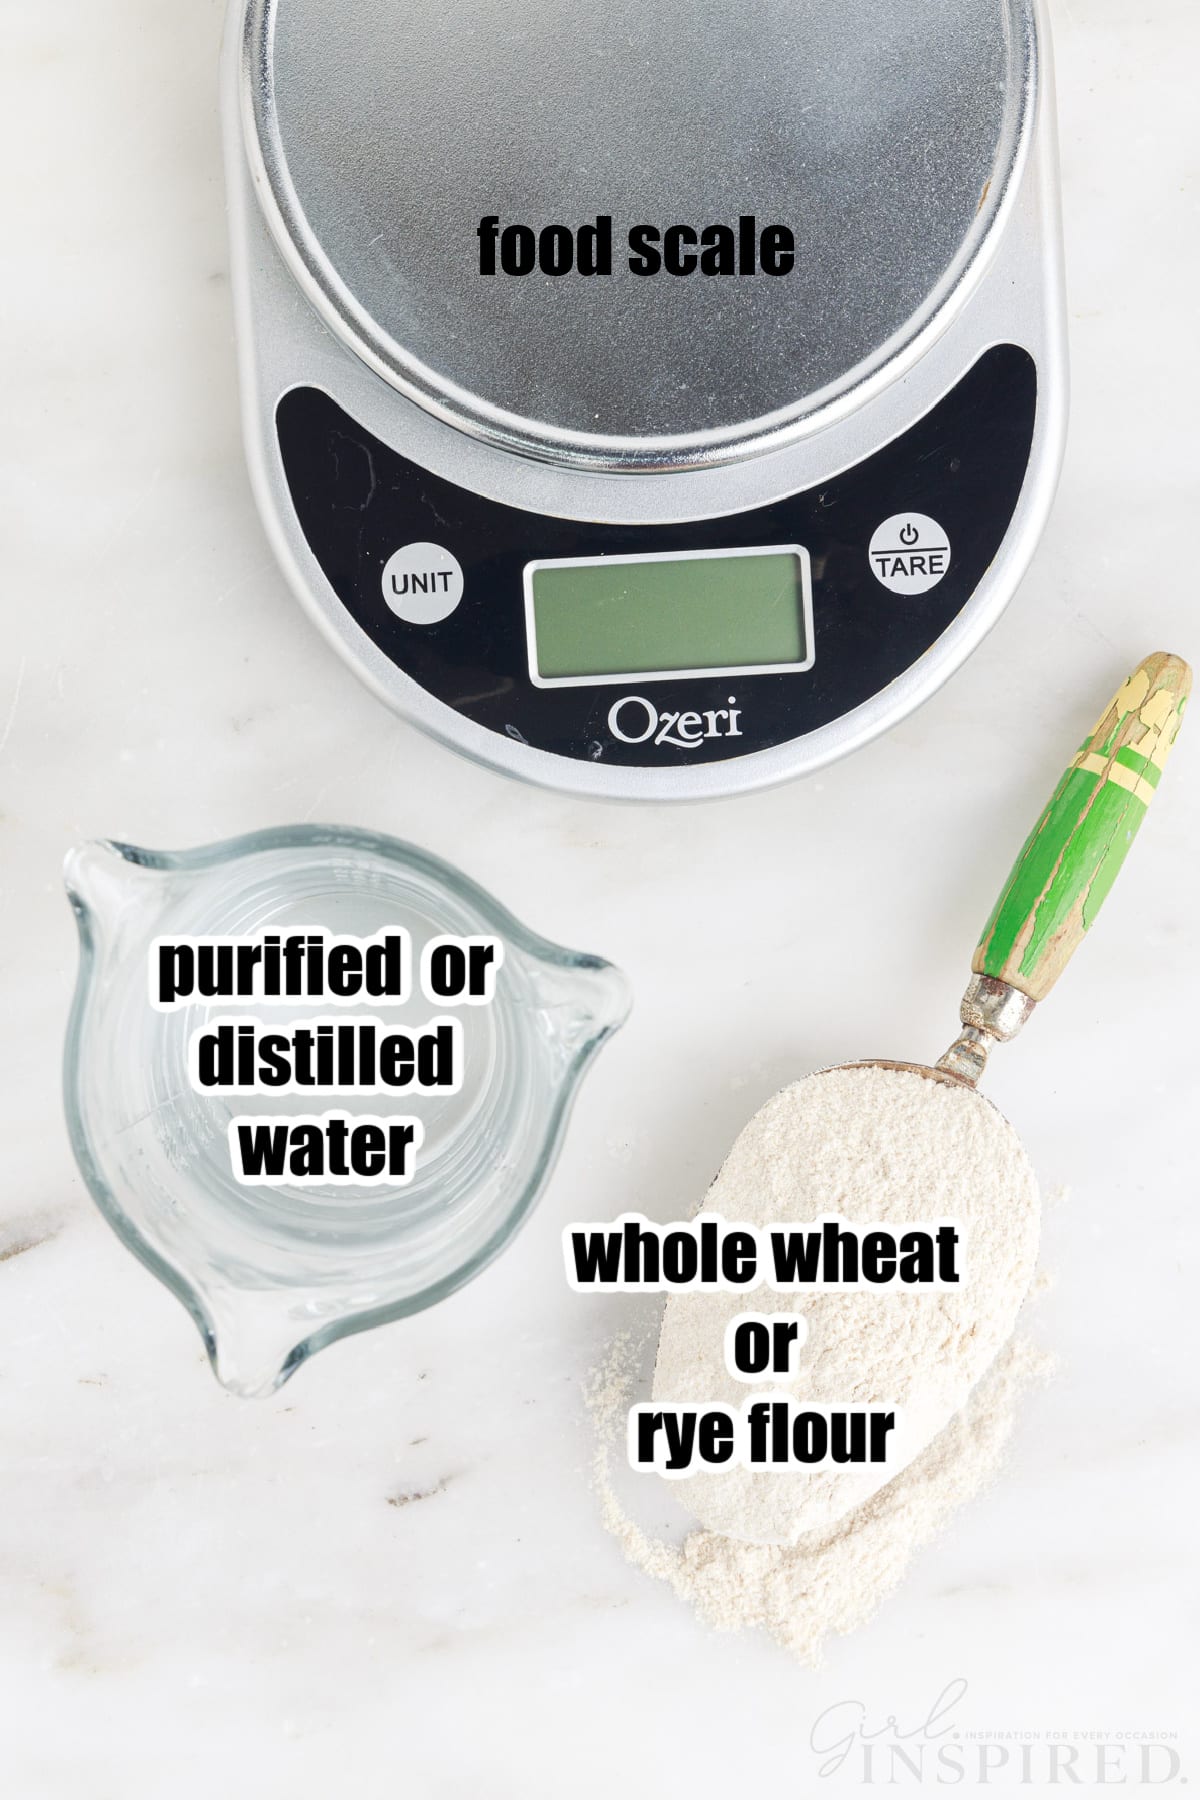 food scale, scoop of flour, and carafe with water, with text labels.